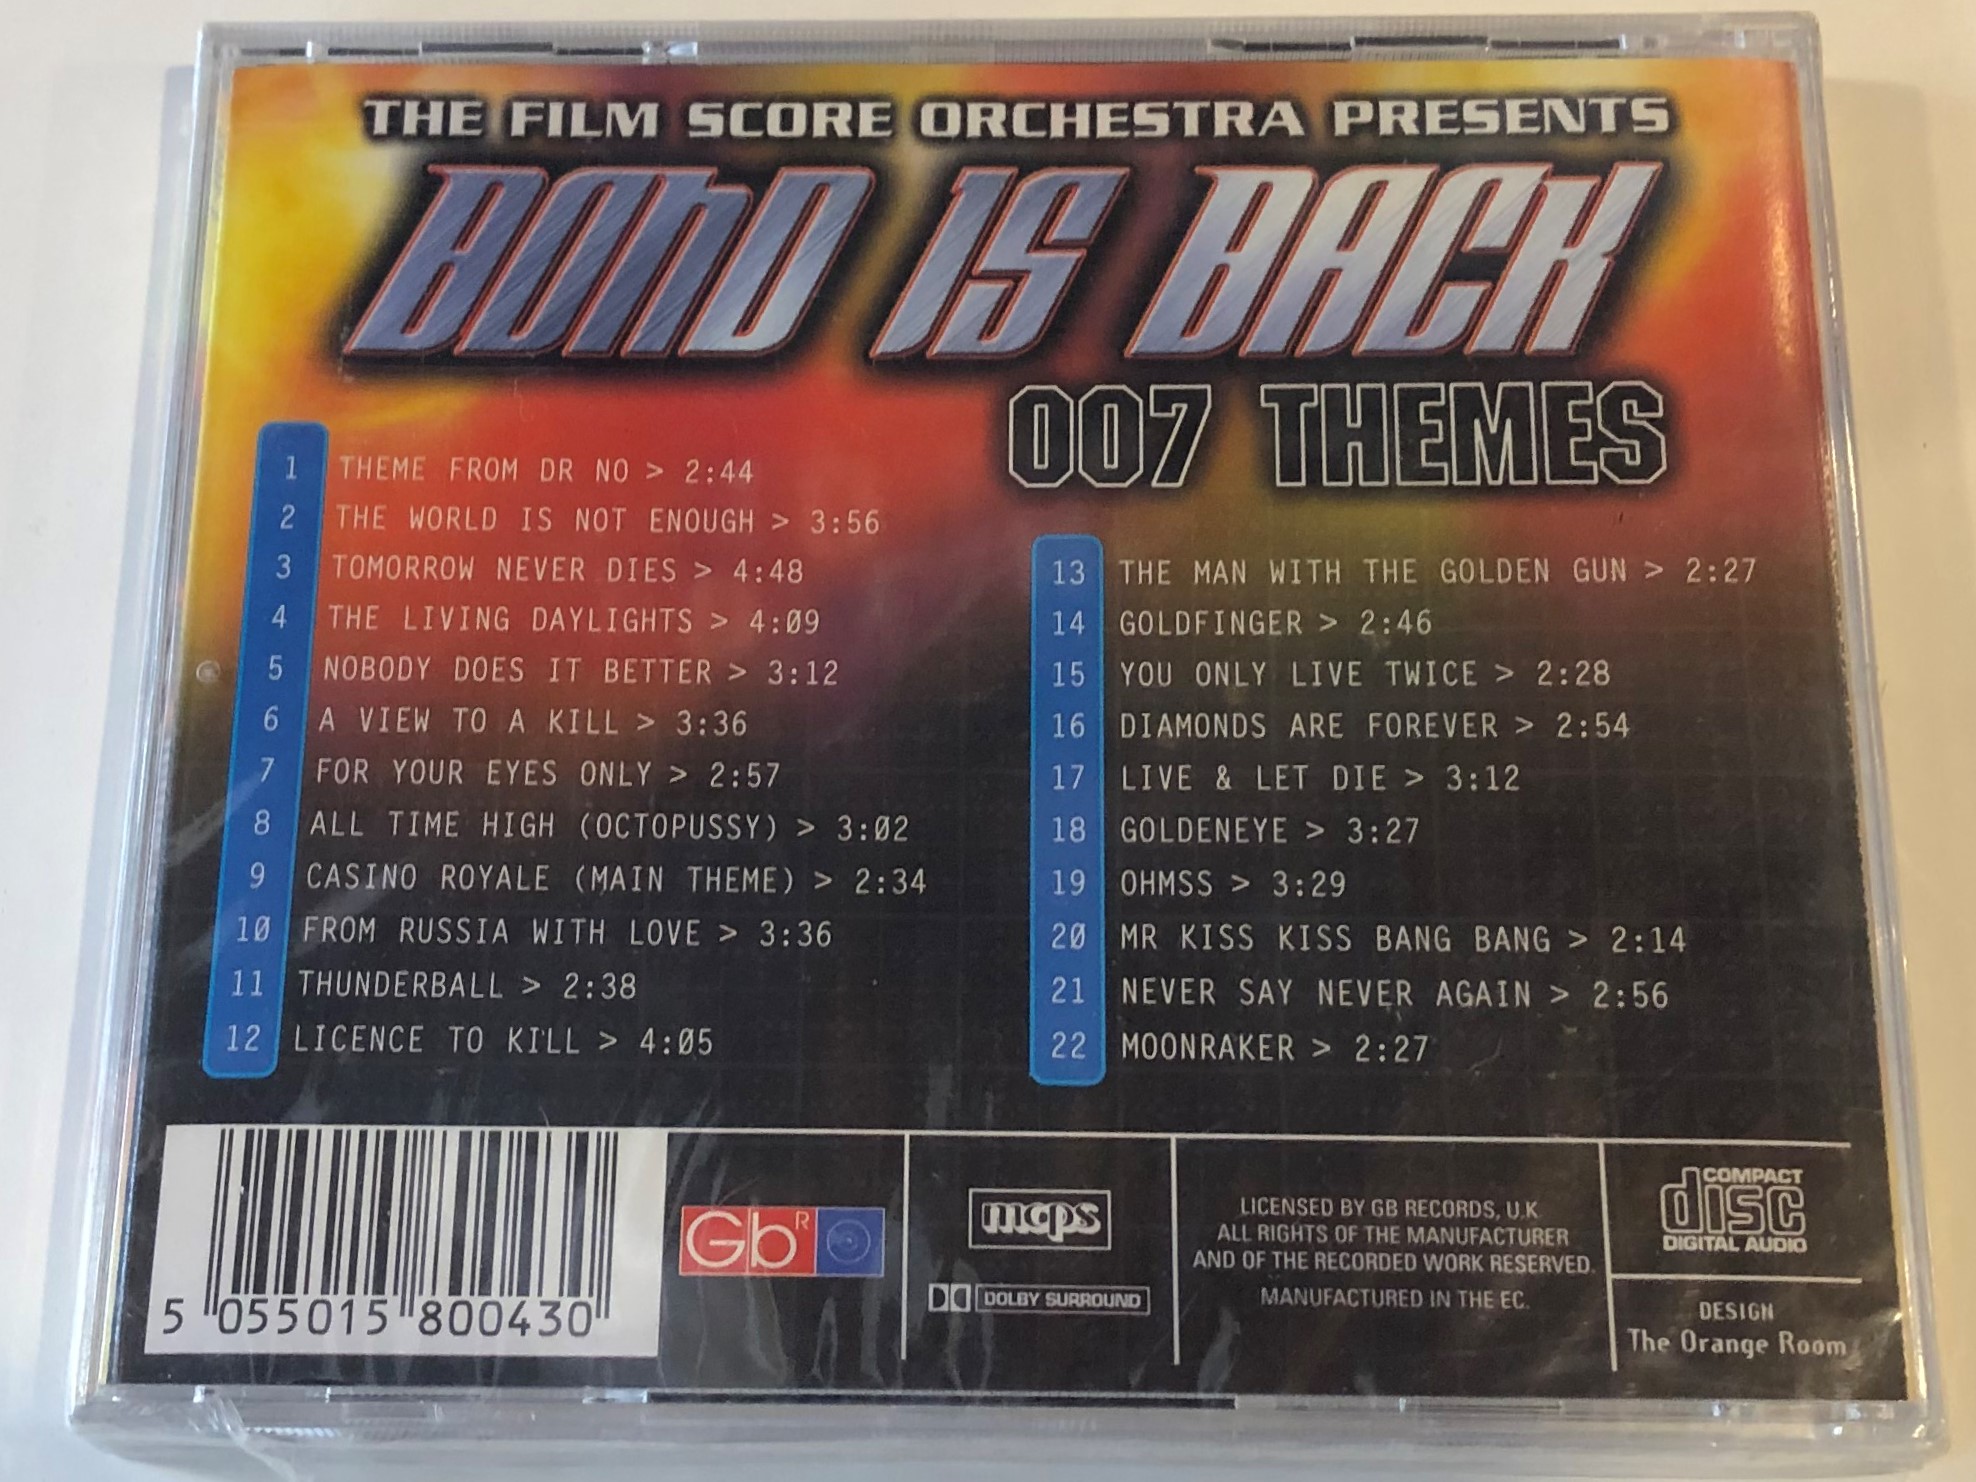 the-film-score-orchestra-presents-bond-is-back-007-themes-goldeneye-the-world-is-not-enough-moonraker-nobody-does-it-better-live-let-die-diamonds-are-forever-tomorrow-never-dies-m.jpg